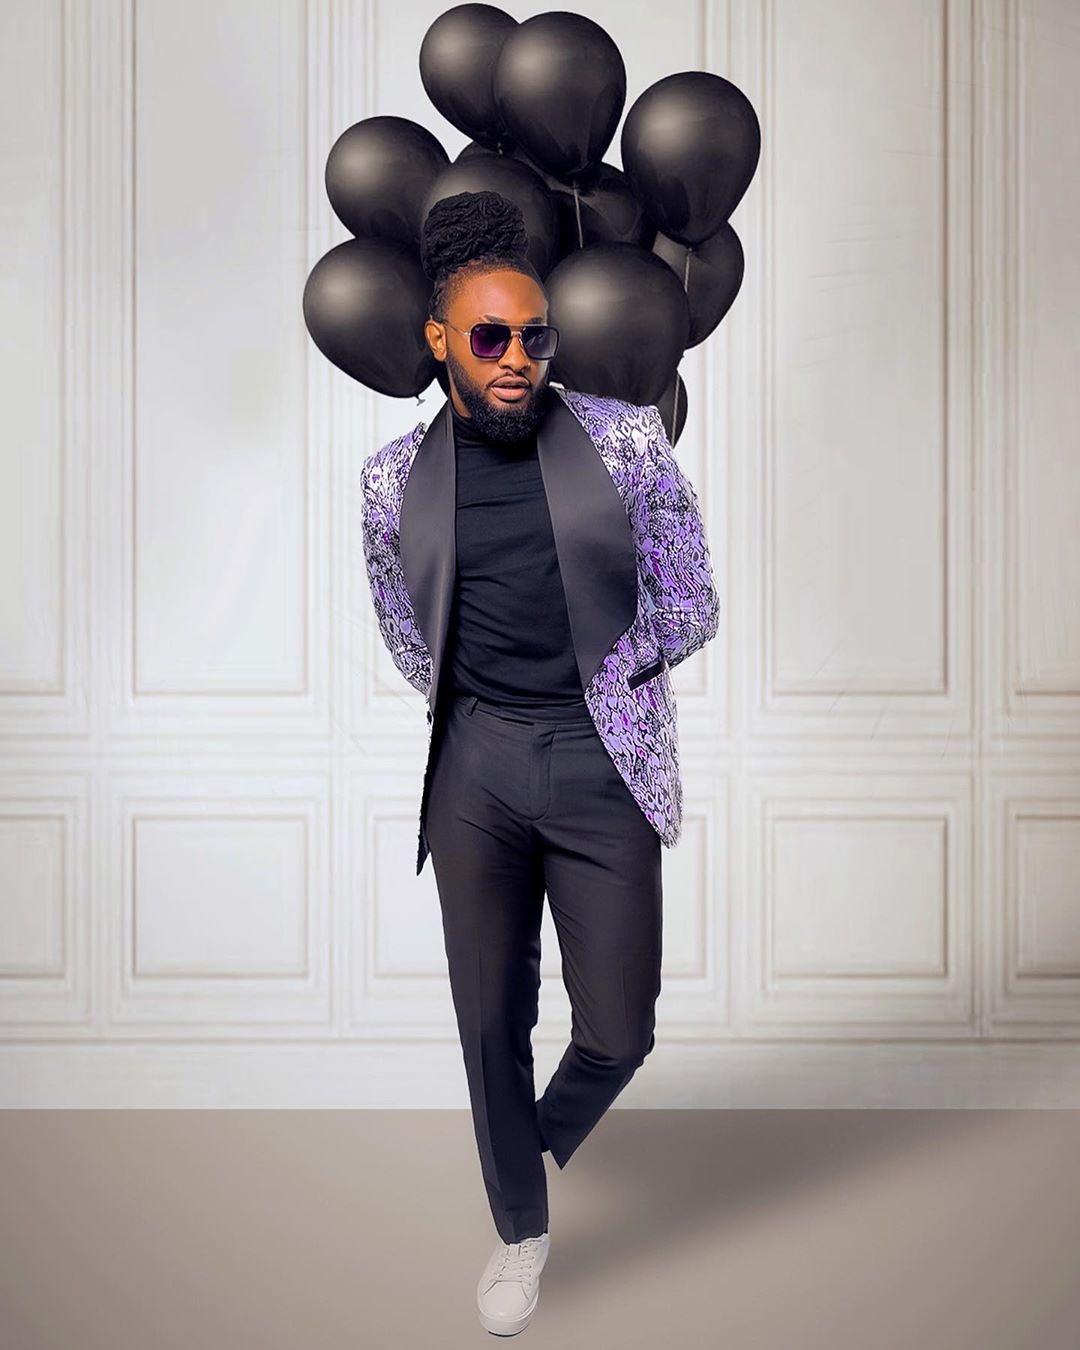 africa-african-male-celebrities-suit-formal-best-dressed-fashion-style-rave